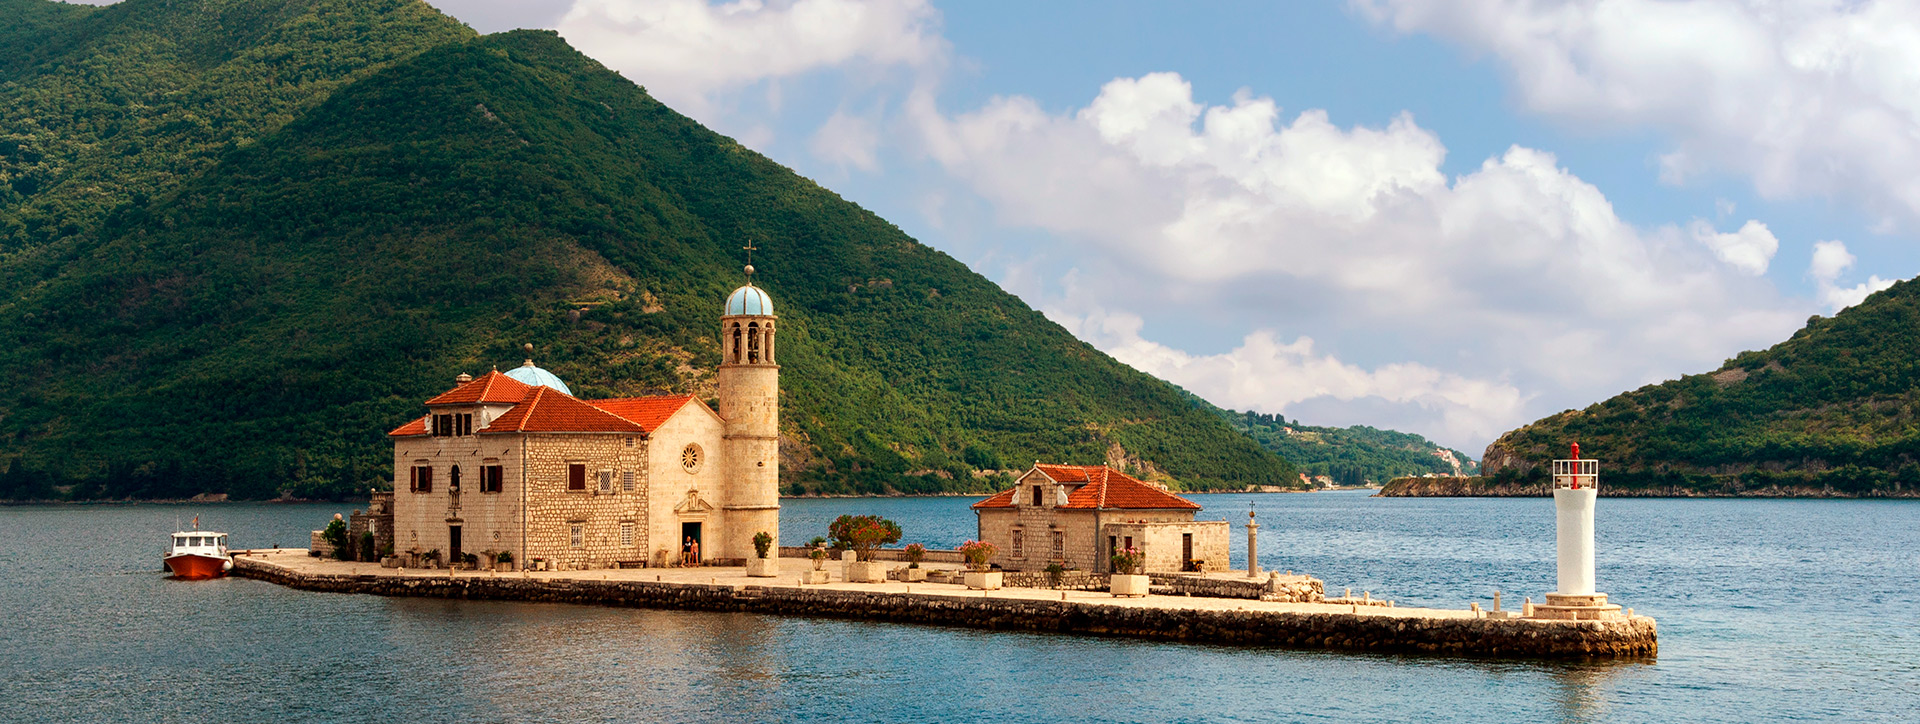 The island of our lady on the rocks, Kotor Bay, Montenegro